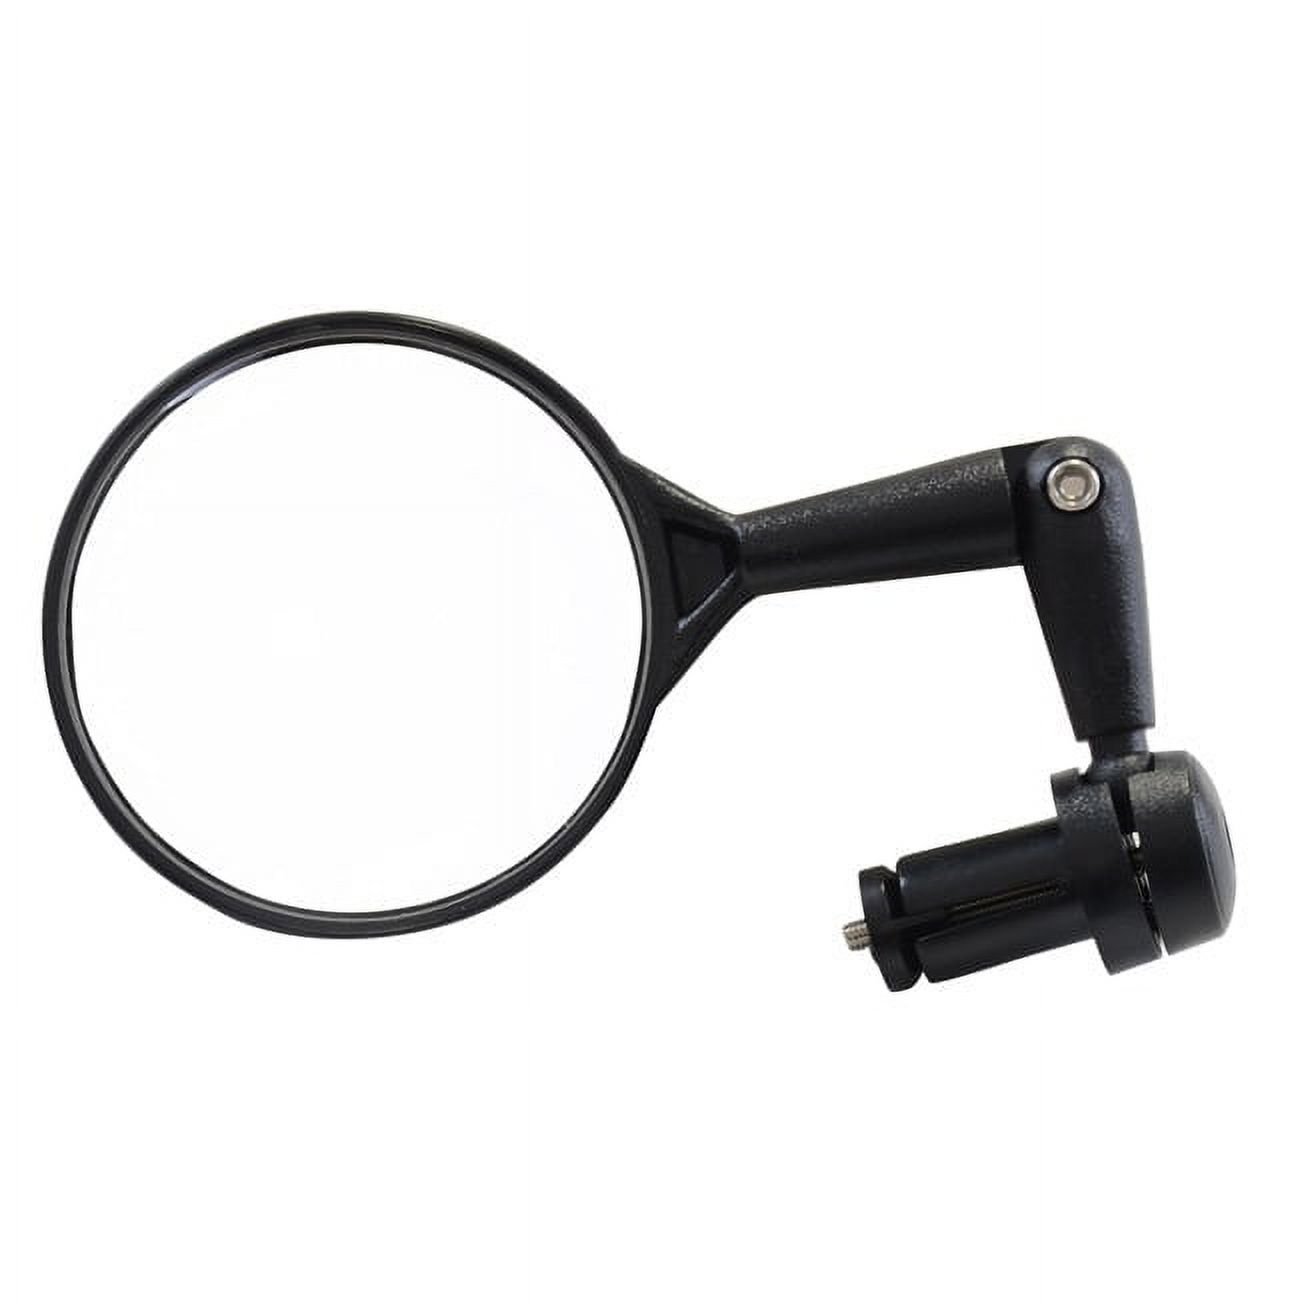 M-Wave Max Spy 3D Bicycle Mirror - image 2 of 2